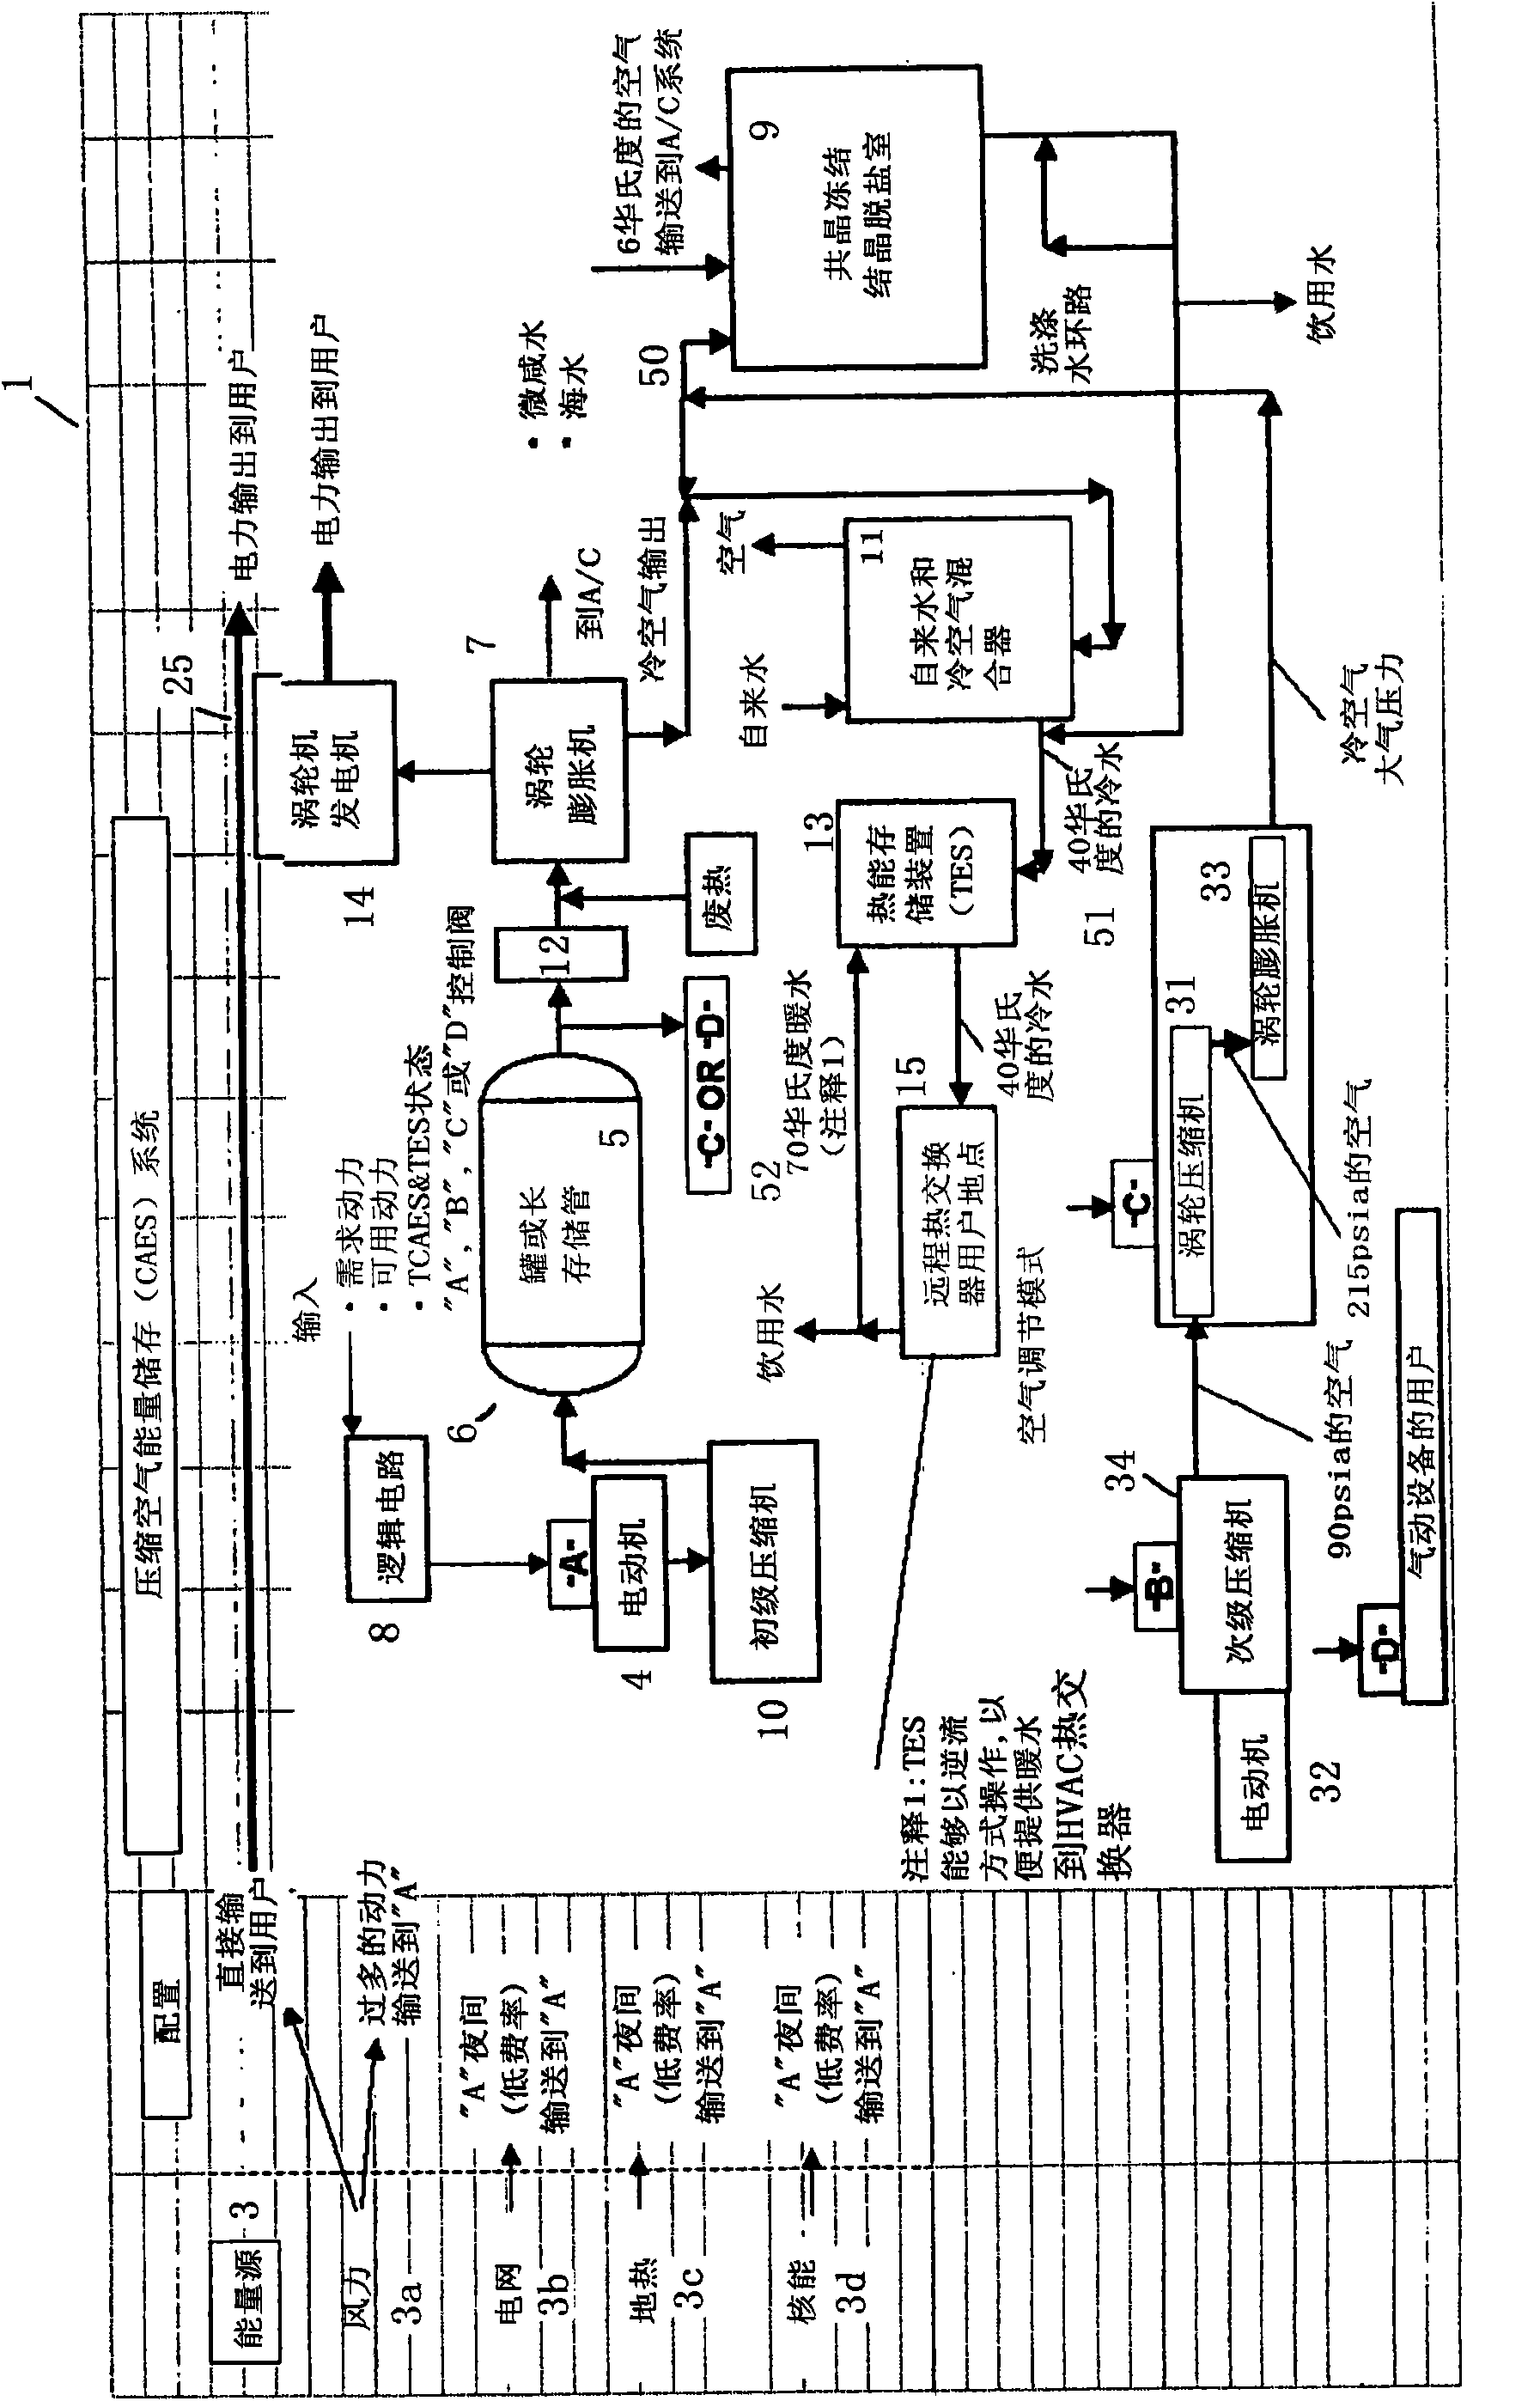 Thermal energy storage system using compressed air energy and/or chilled water from desalination processes